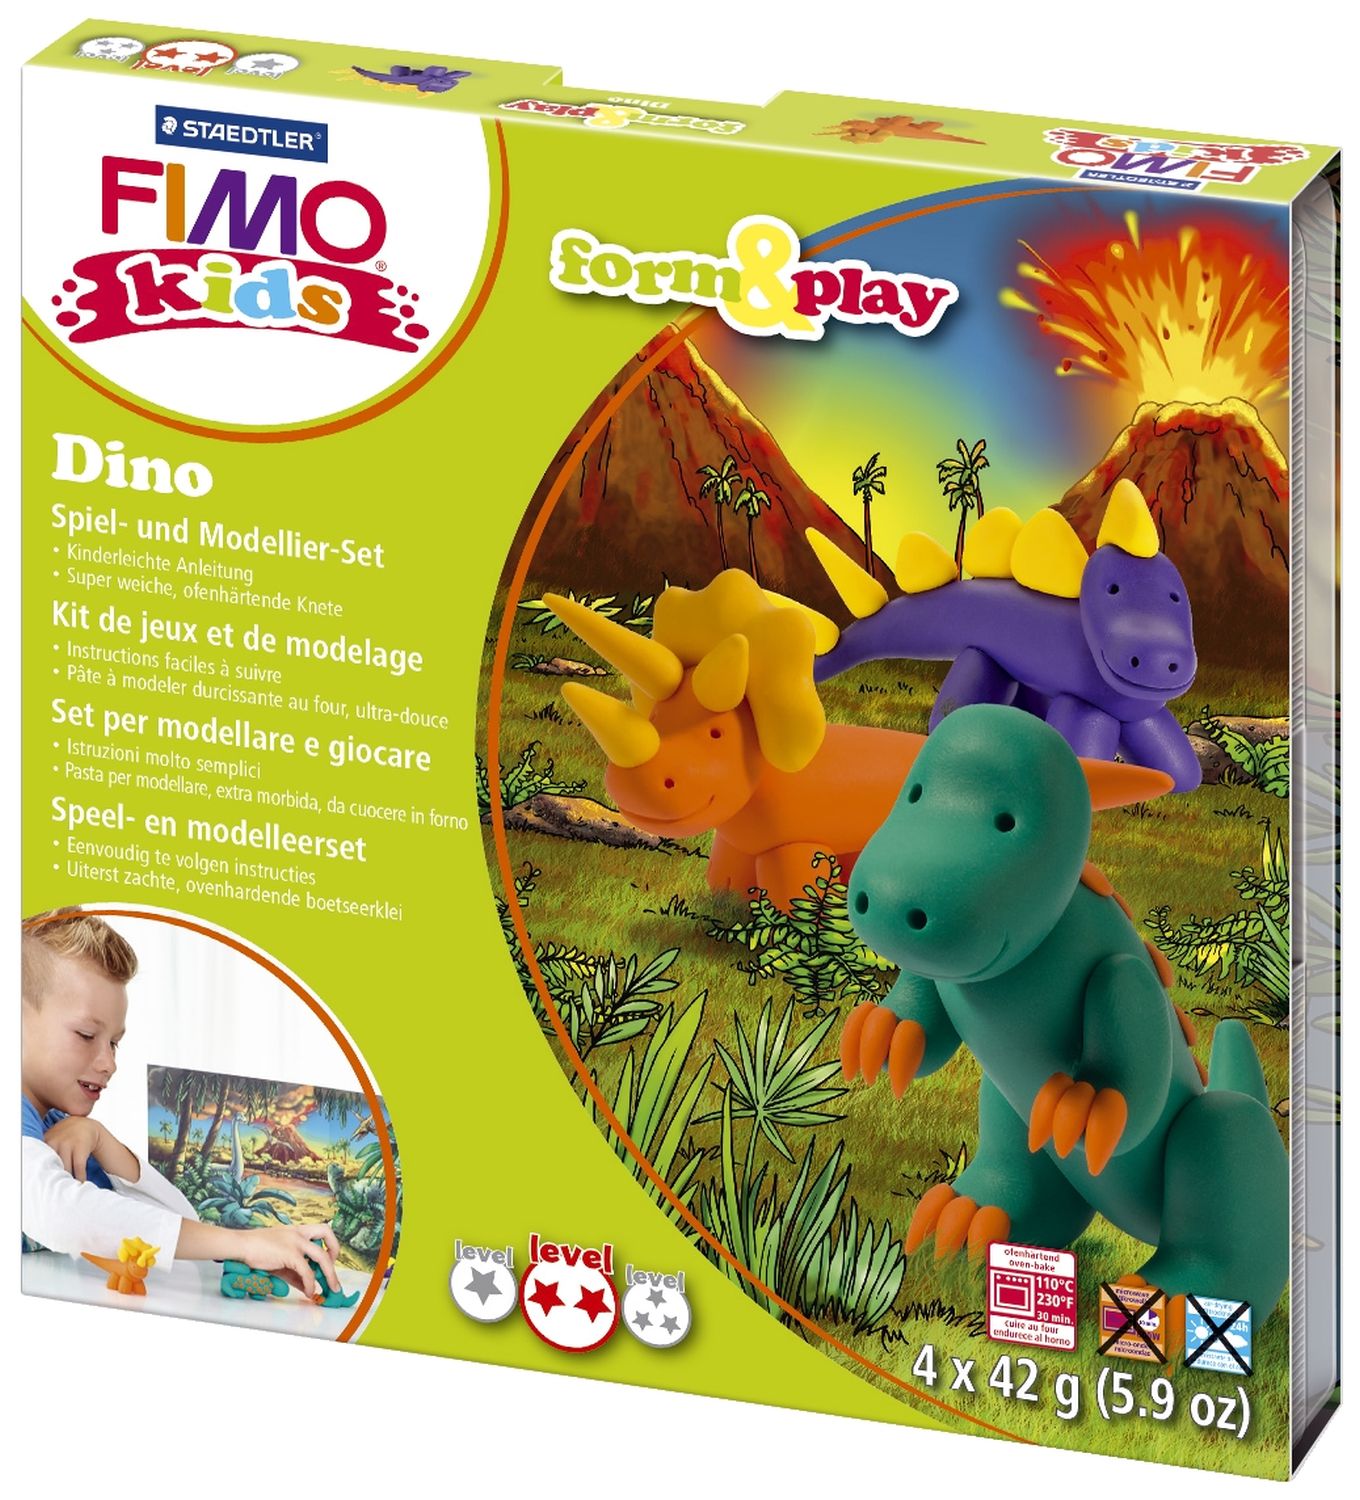 Modelliermasse FIMO® Kids Materialpackung Form & Play "Dino", 4 x 42 g